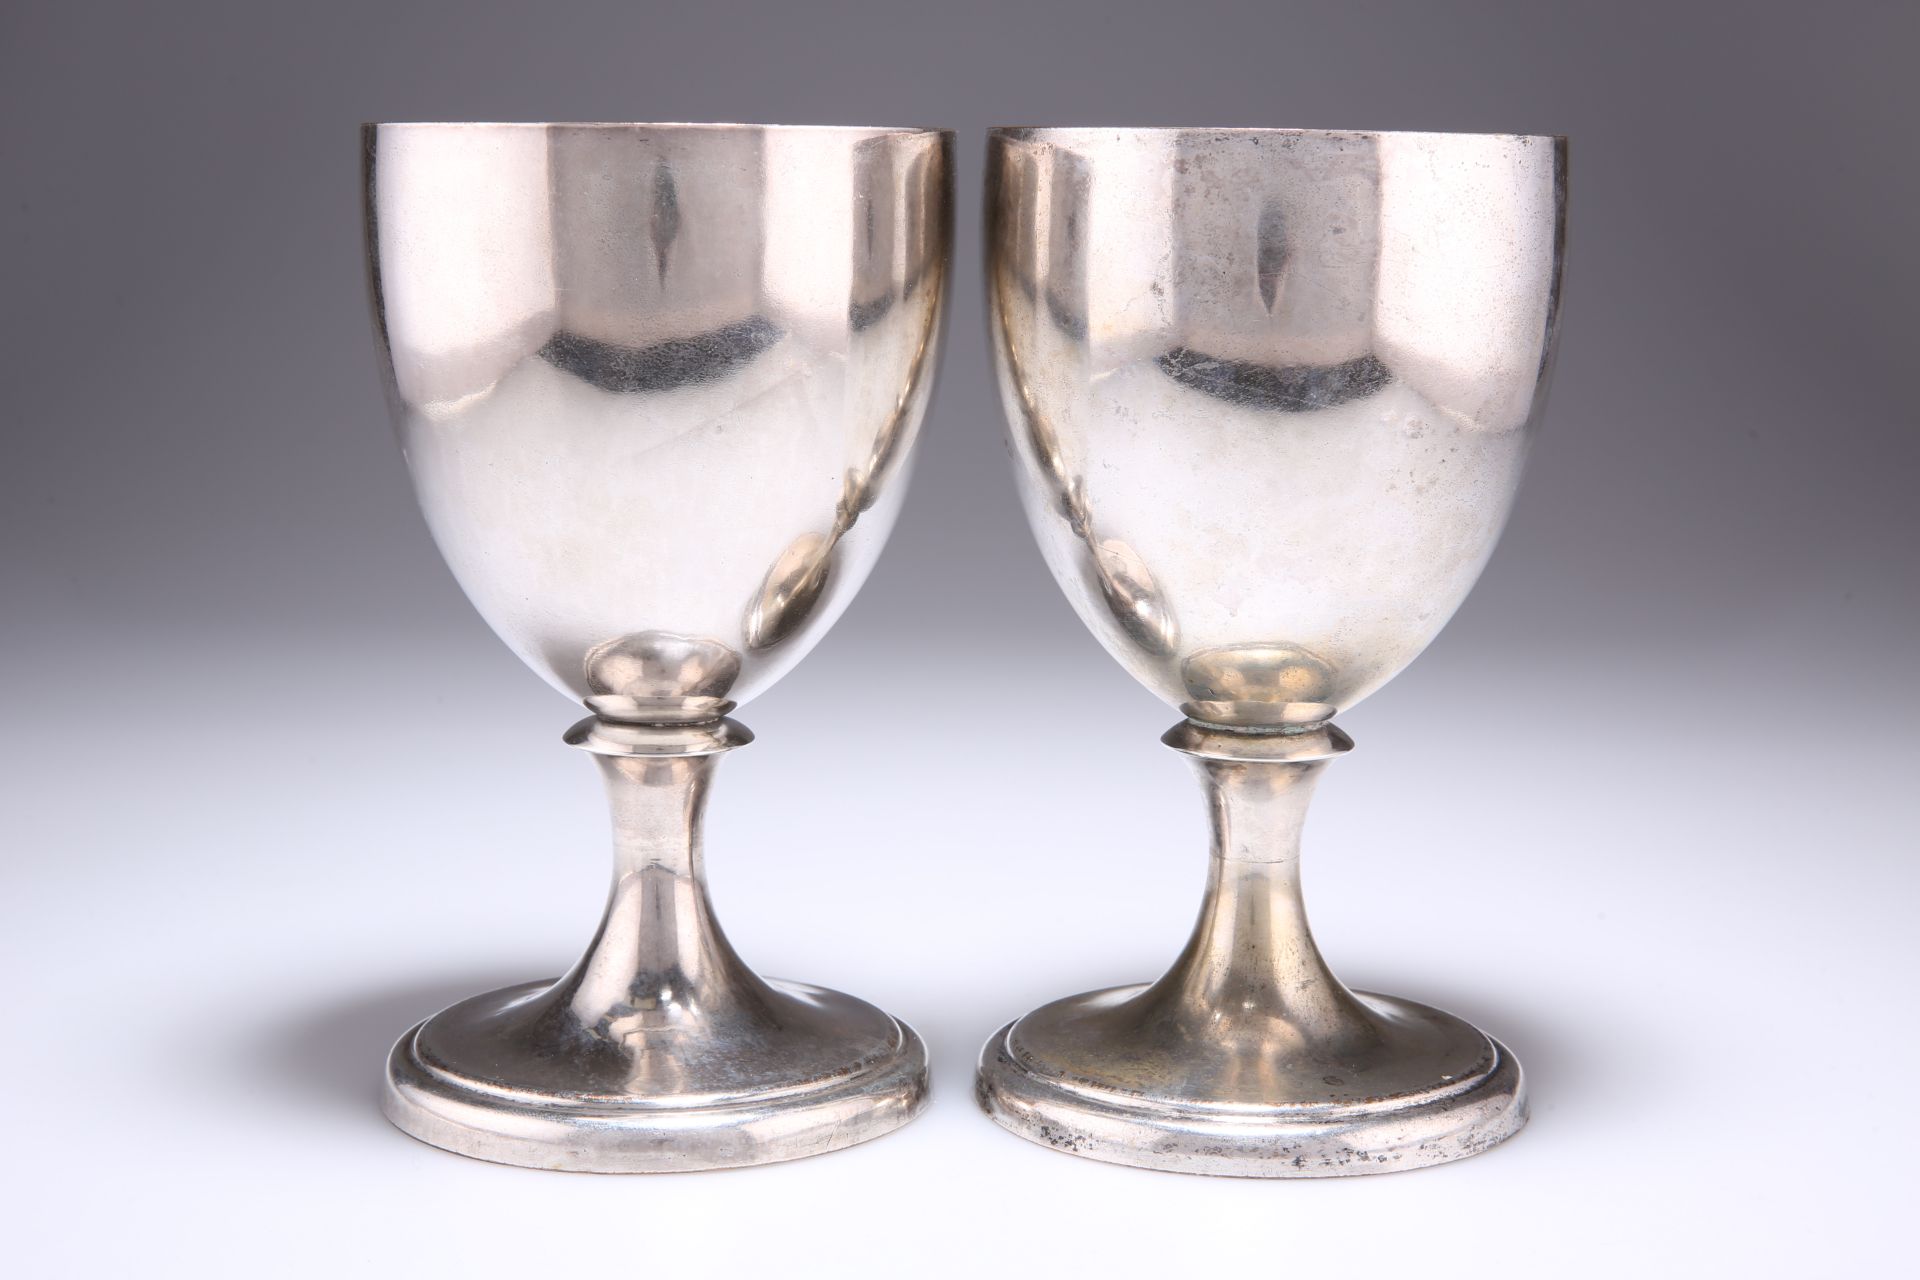 A PAIR OF OLD SHEFFIELD PLATE GOBLETS, CIRCA 1790